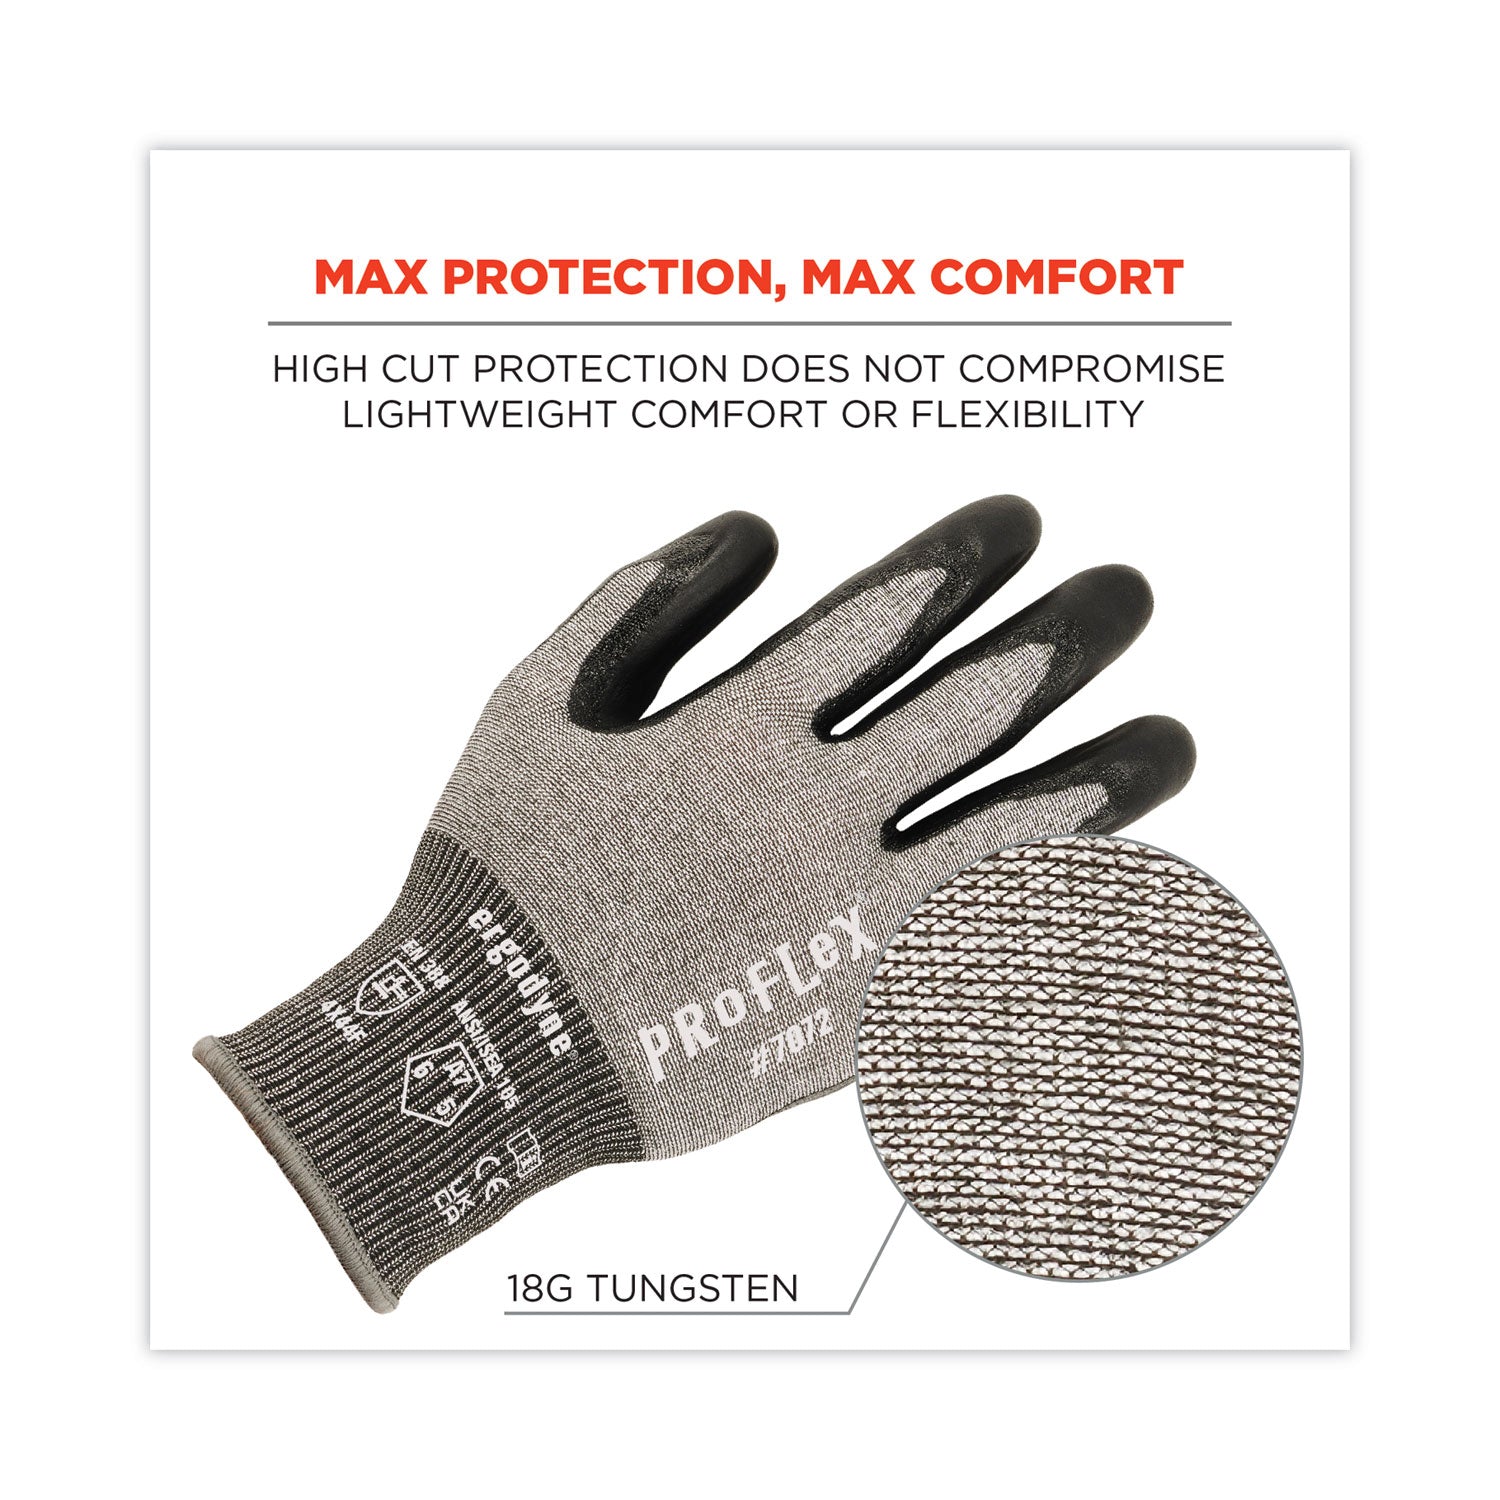 proflex-7072-ansi-a7-nitrile-coated-cr-gloves-gray-medium-pair-ships-in-1-3-business-days_ego10313 - 5